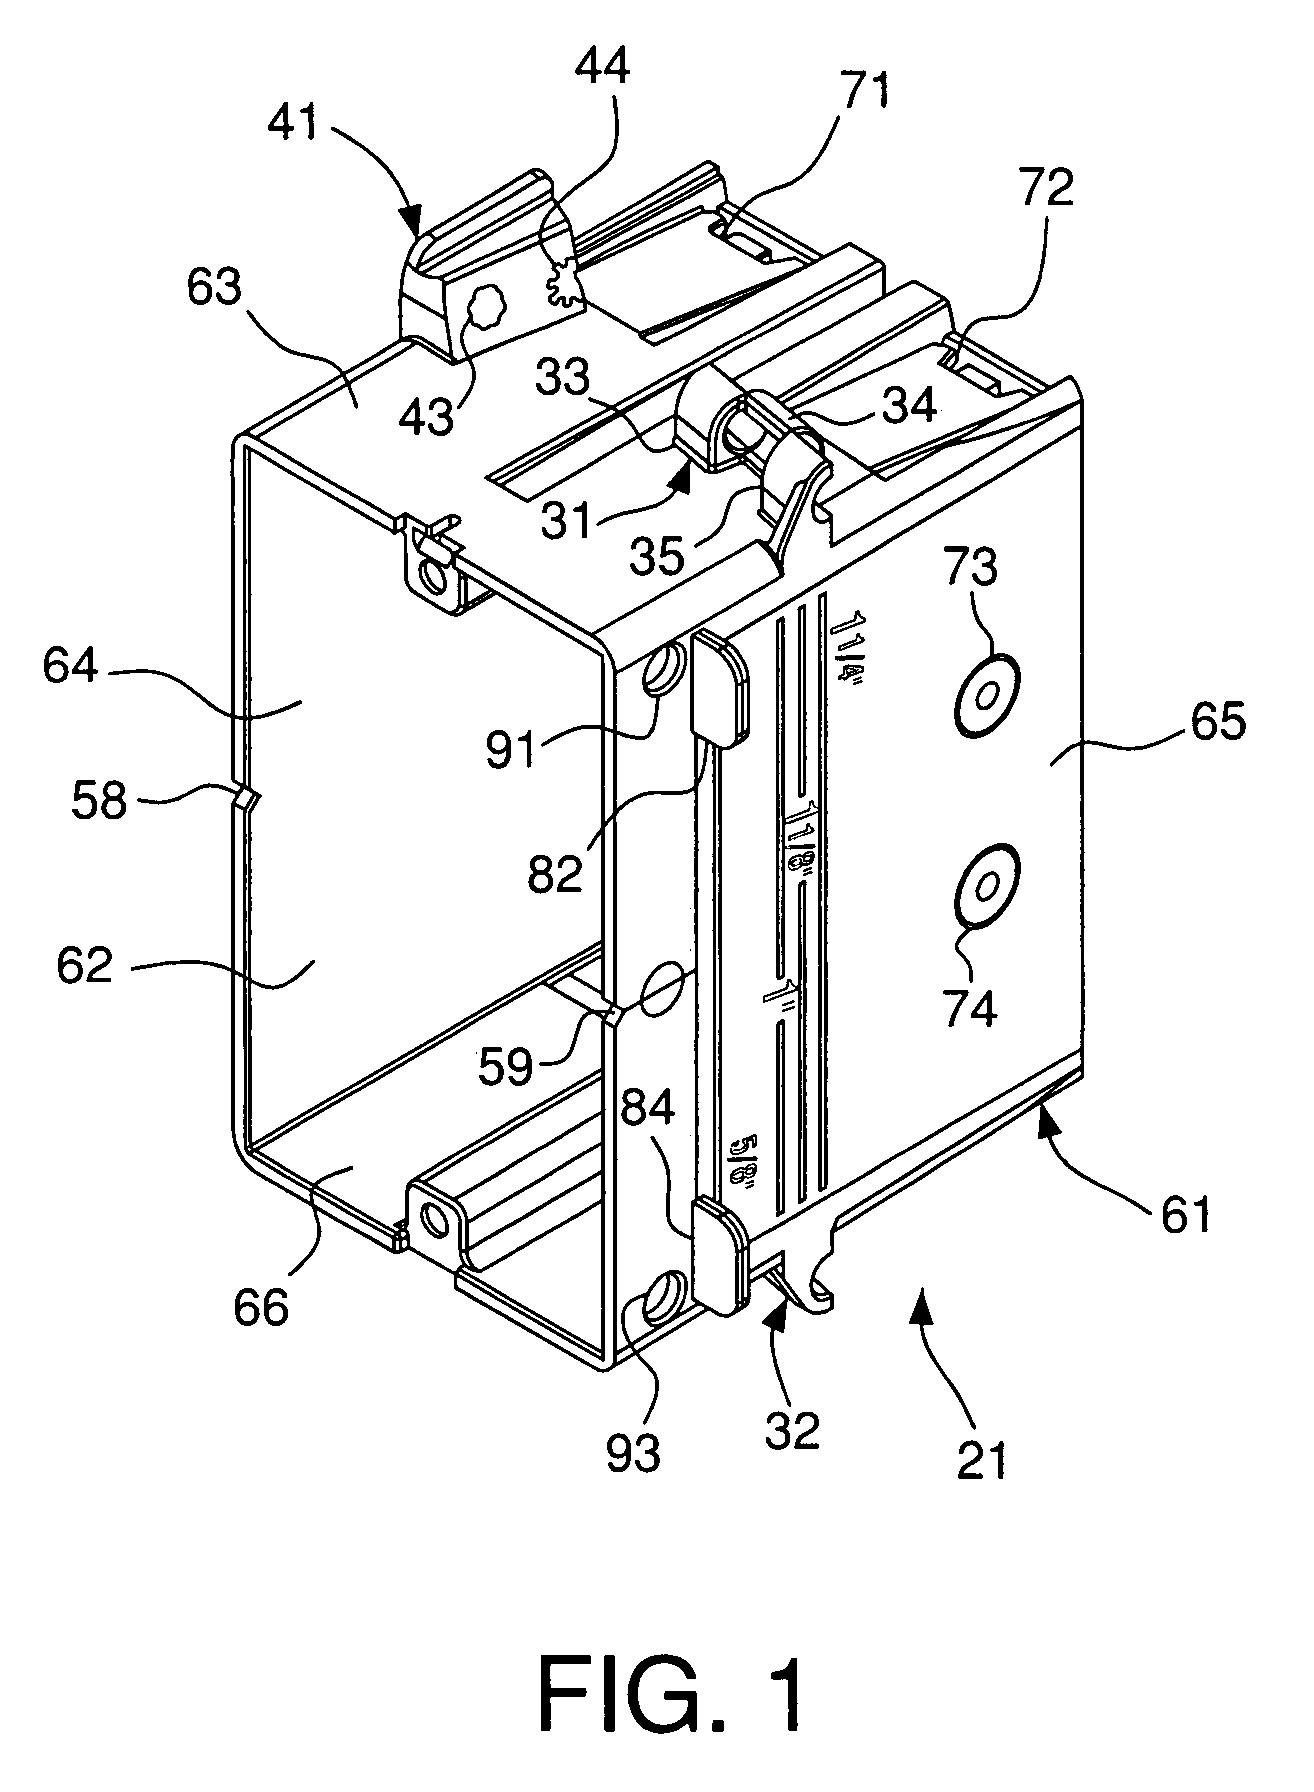 Electrical box assembly